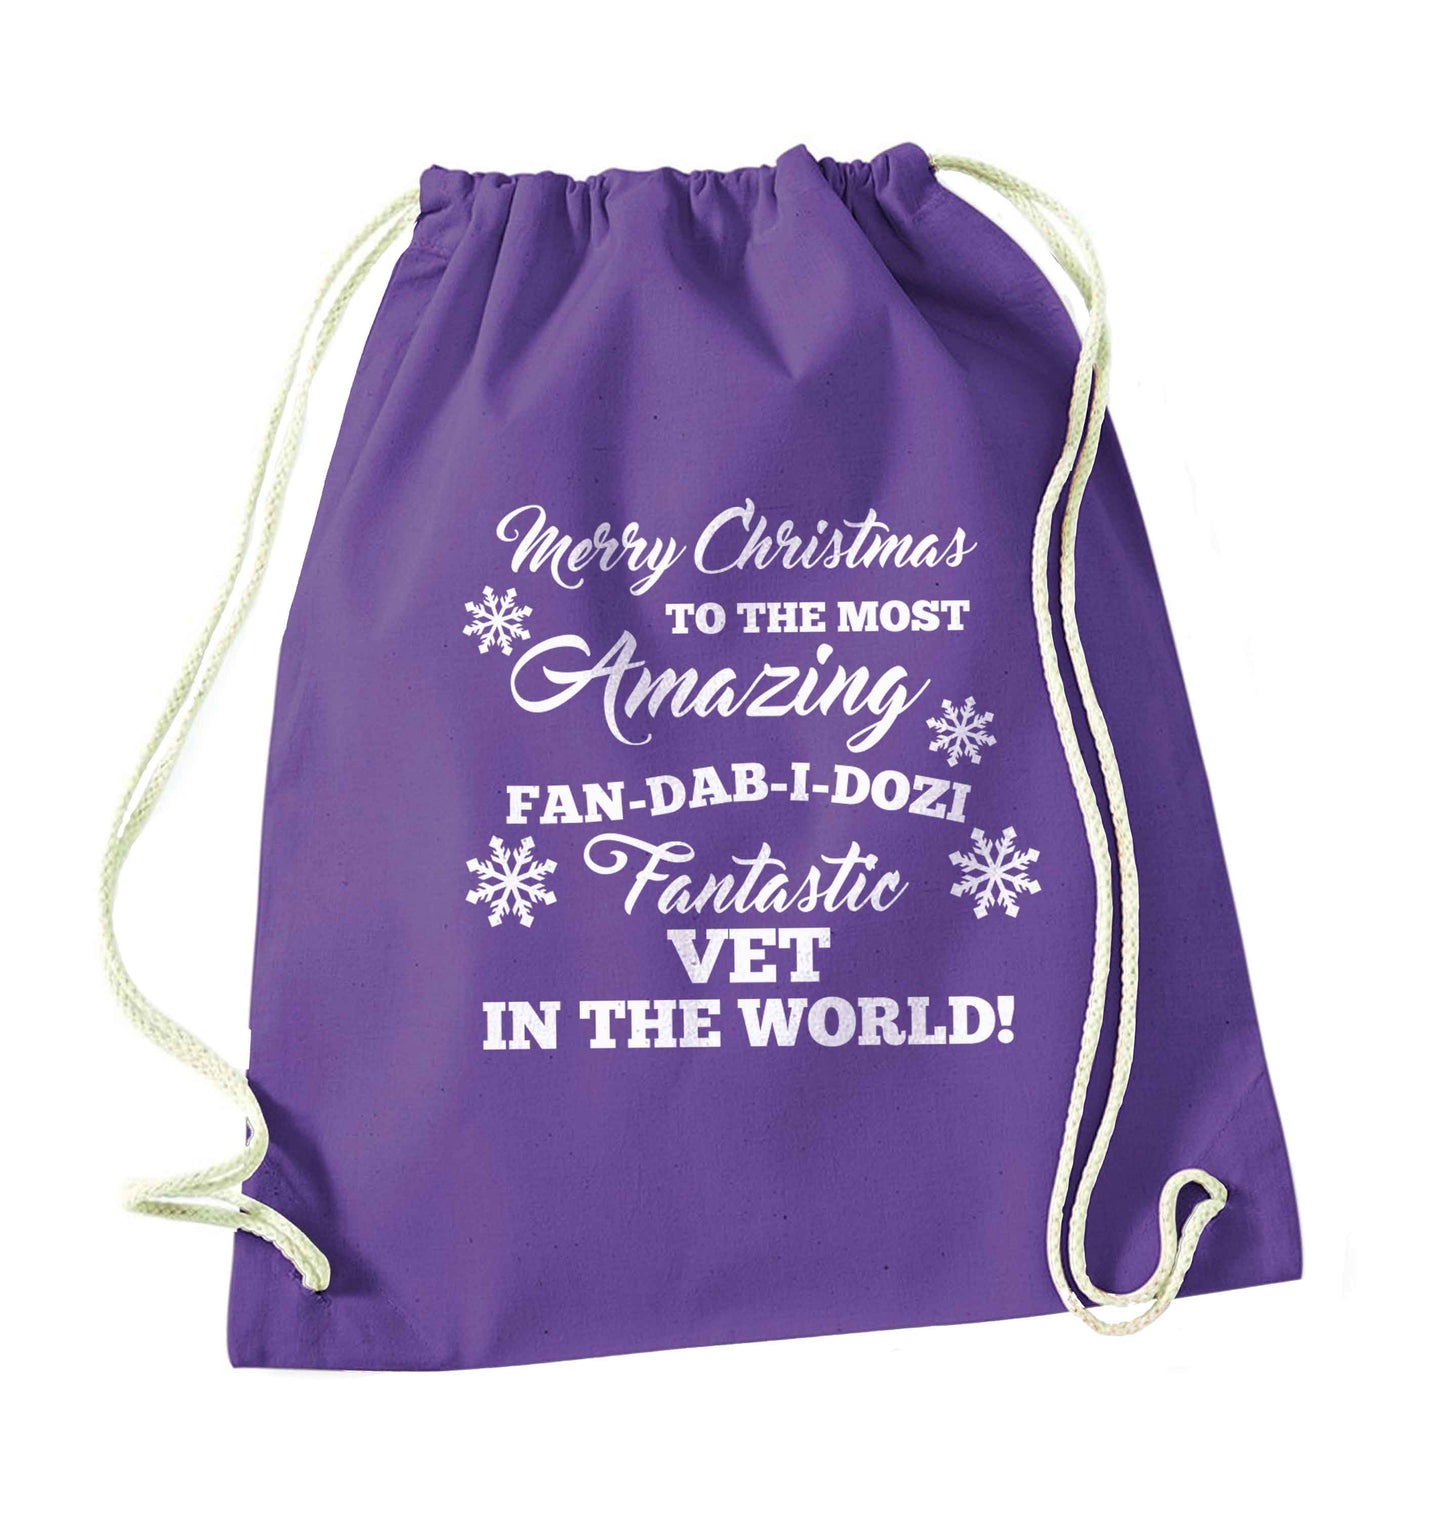 Merry Christmas to the most amazing vet in the world! purple drawstring bag